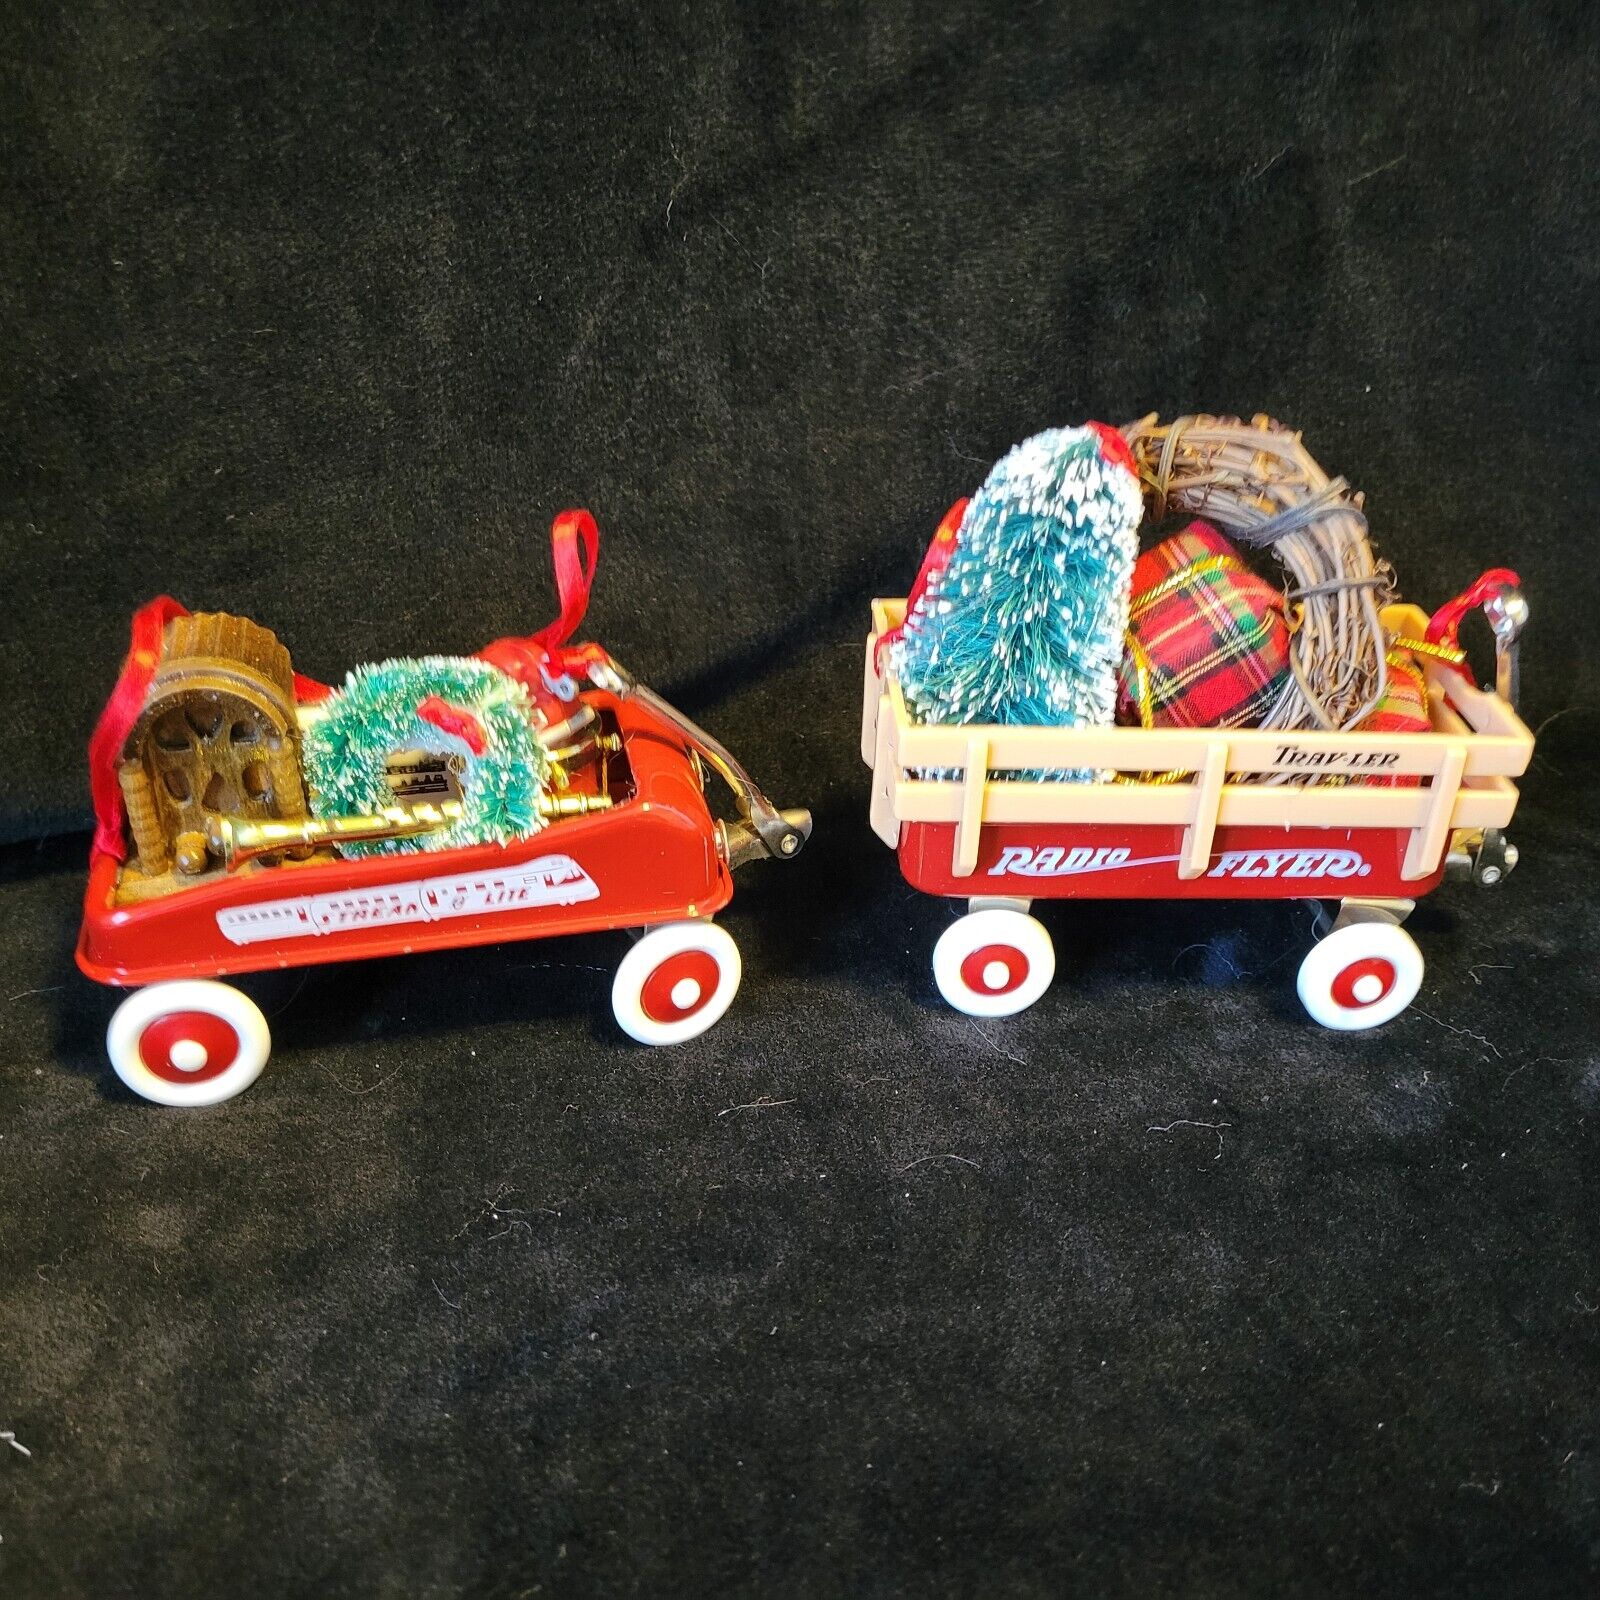 Vintage Radio Flyer LIttle Red Wagon Models Christmas Ornaments Lot of 2